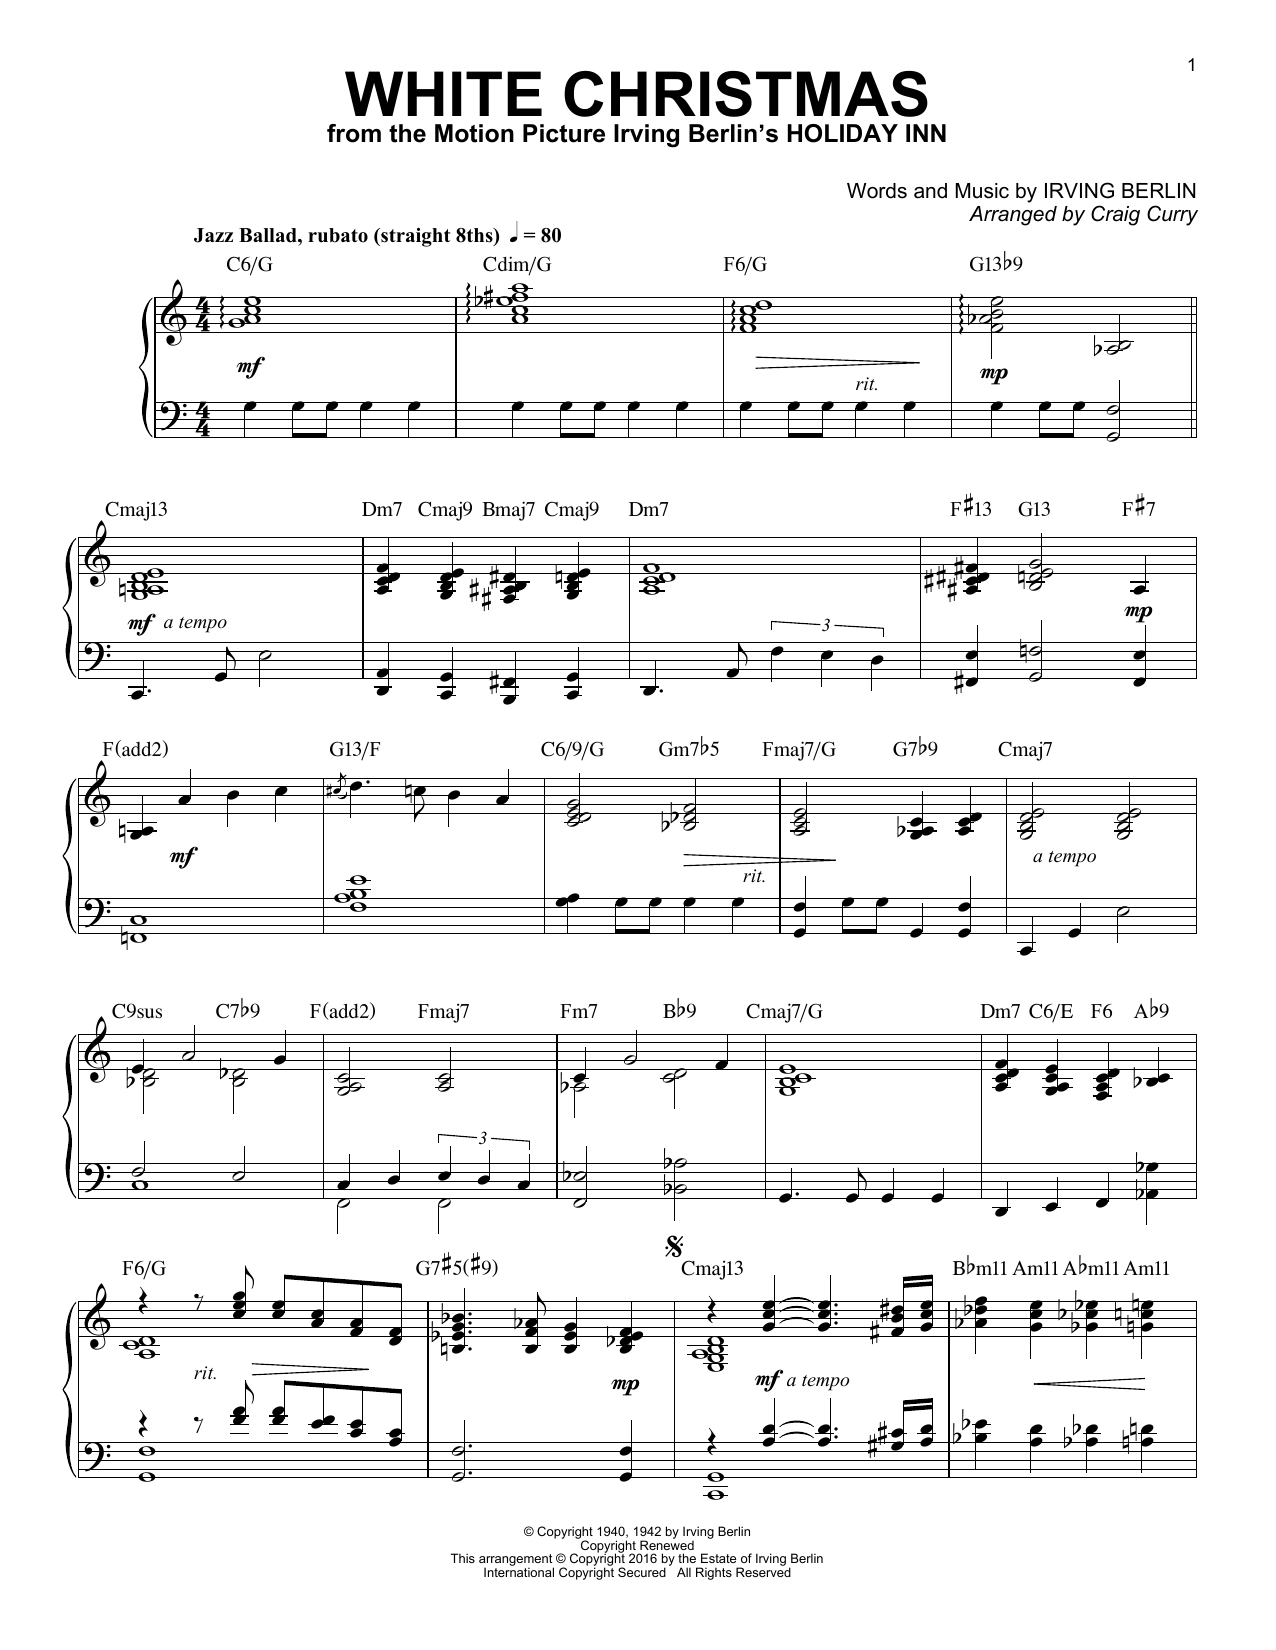 Download Craig Curry White Christmas Sheet Music